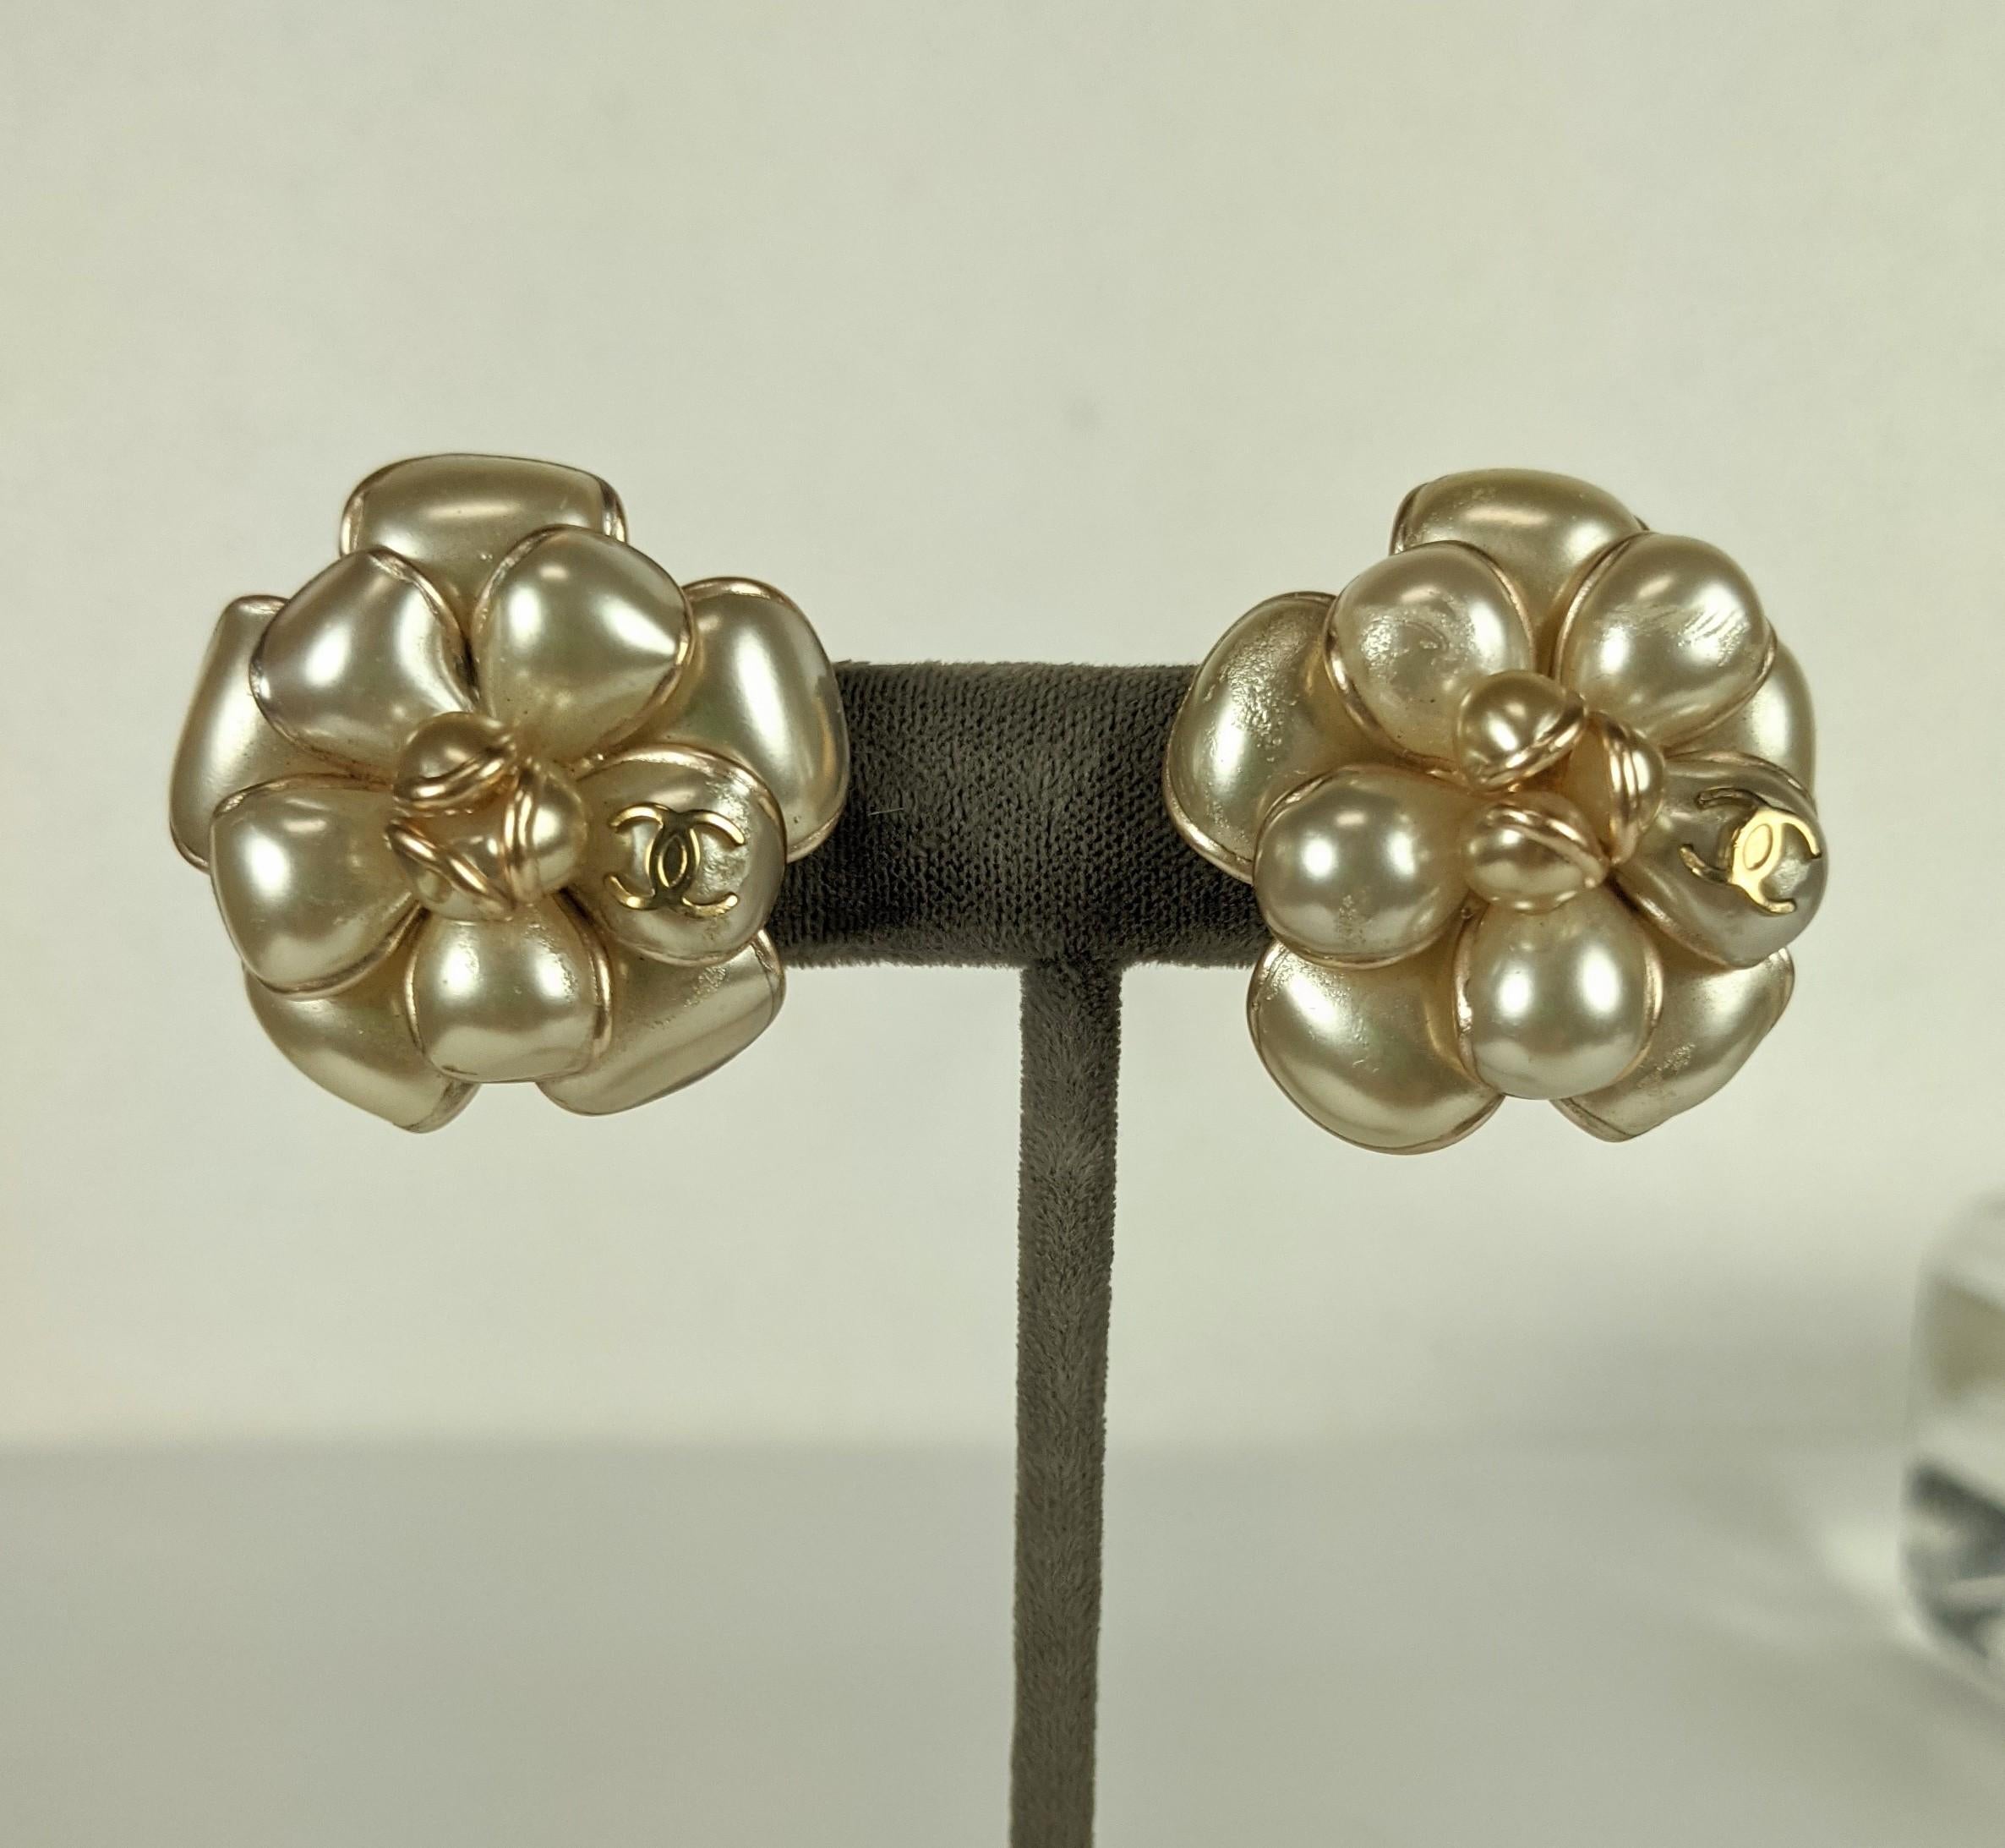 Chanel Pearlized Poured Glass Camellia Earrings from the 1990's. An original runway sample with a 